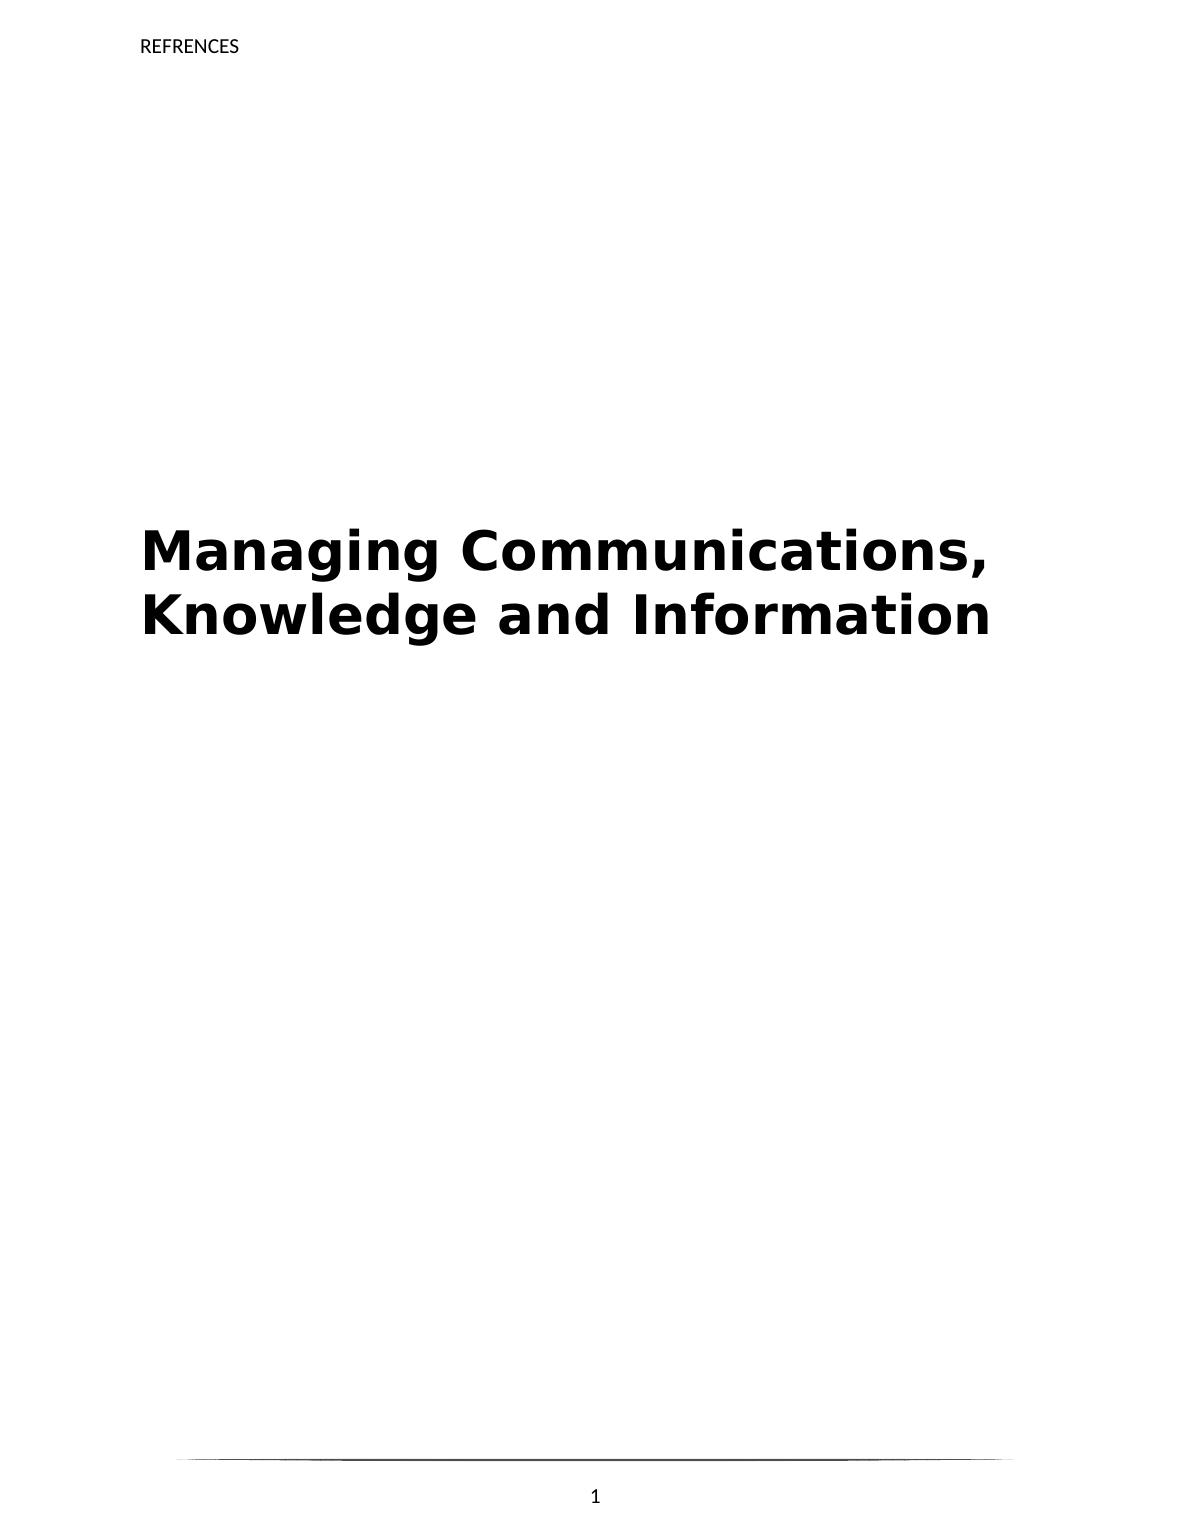 Assignment: Managing Communications, Knowledge and Information_1